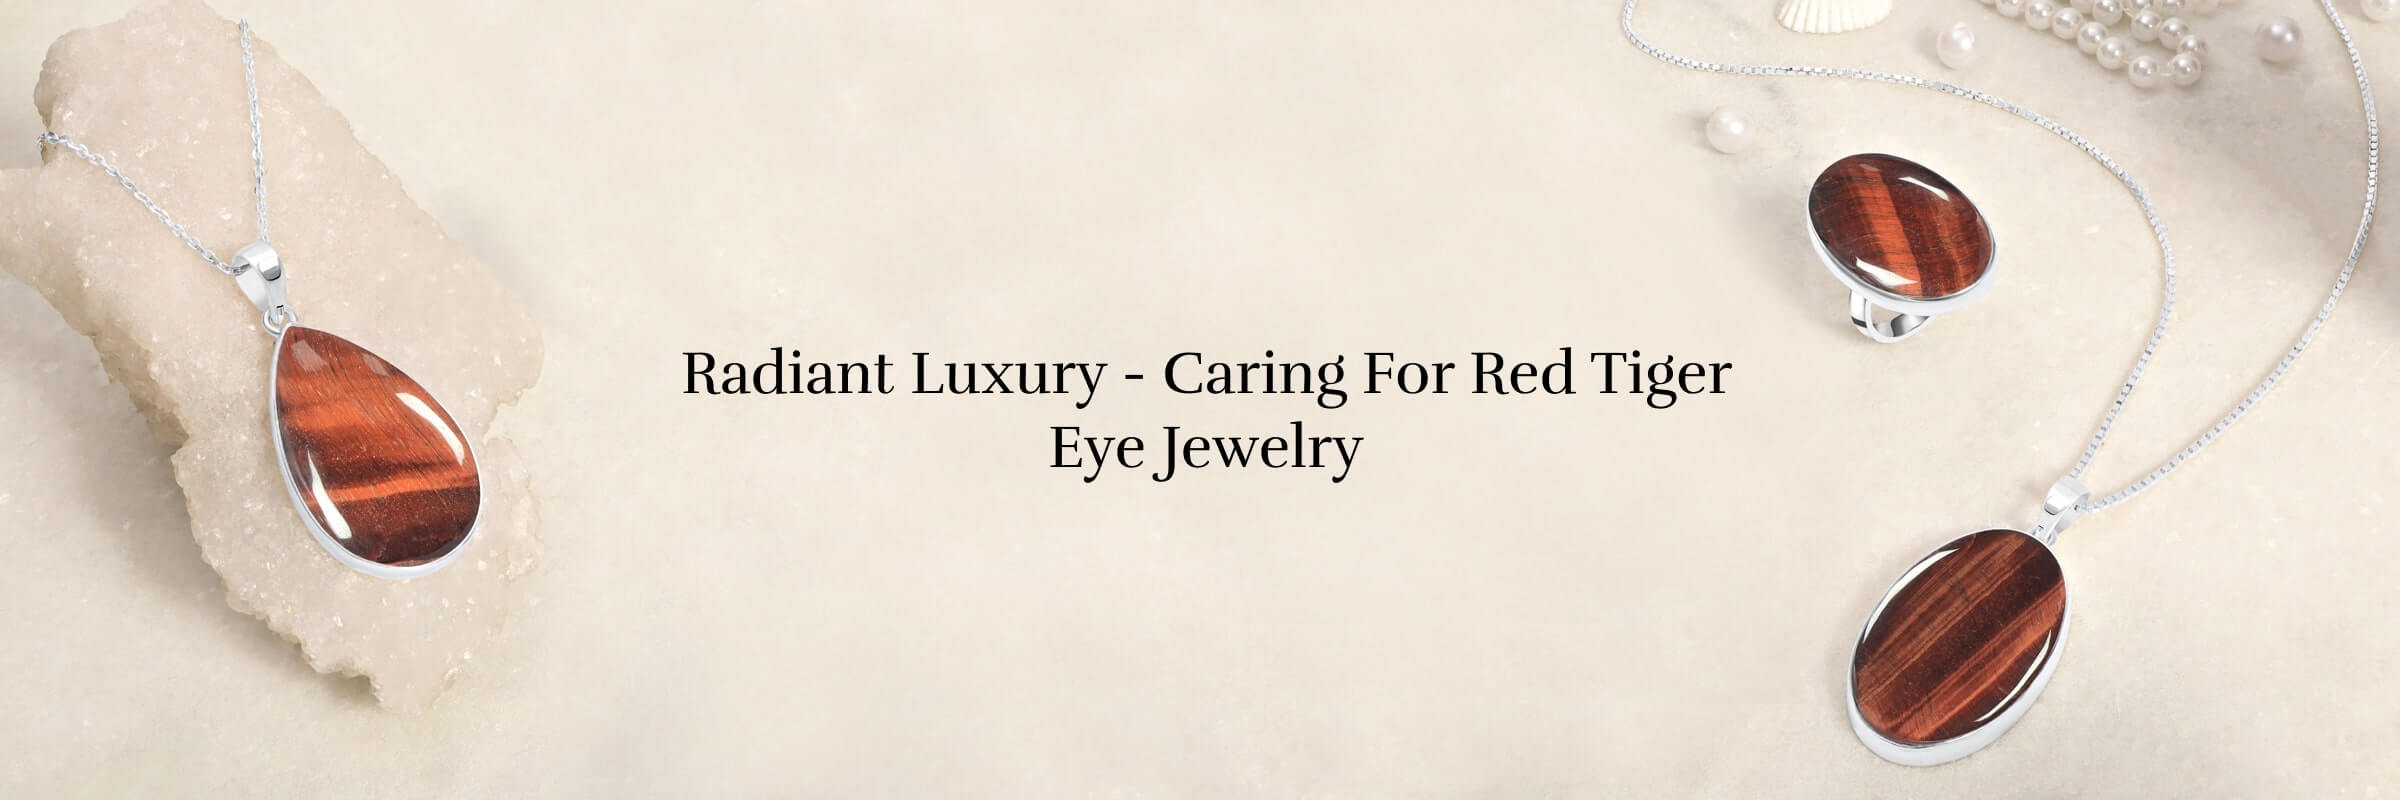 How To Do Proper Care of Your Red Tiger Eye Designer Jewelry